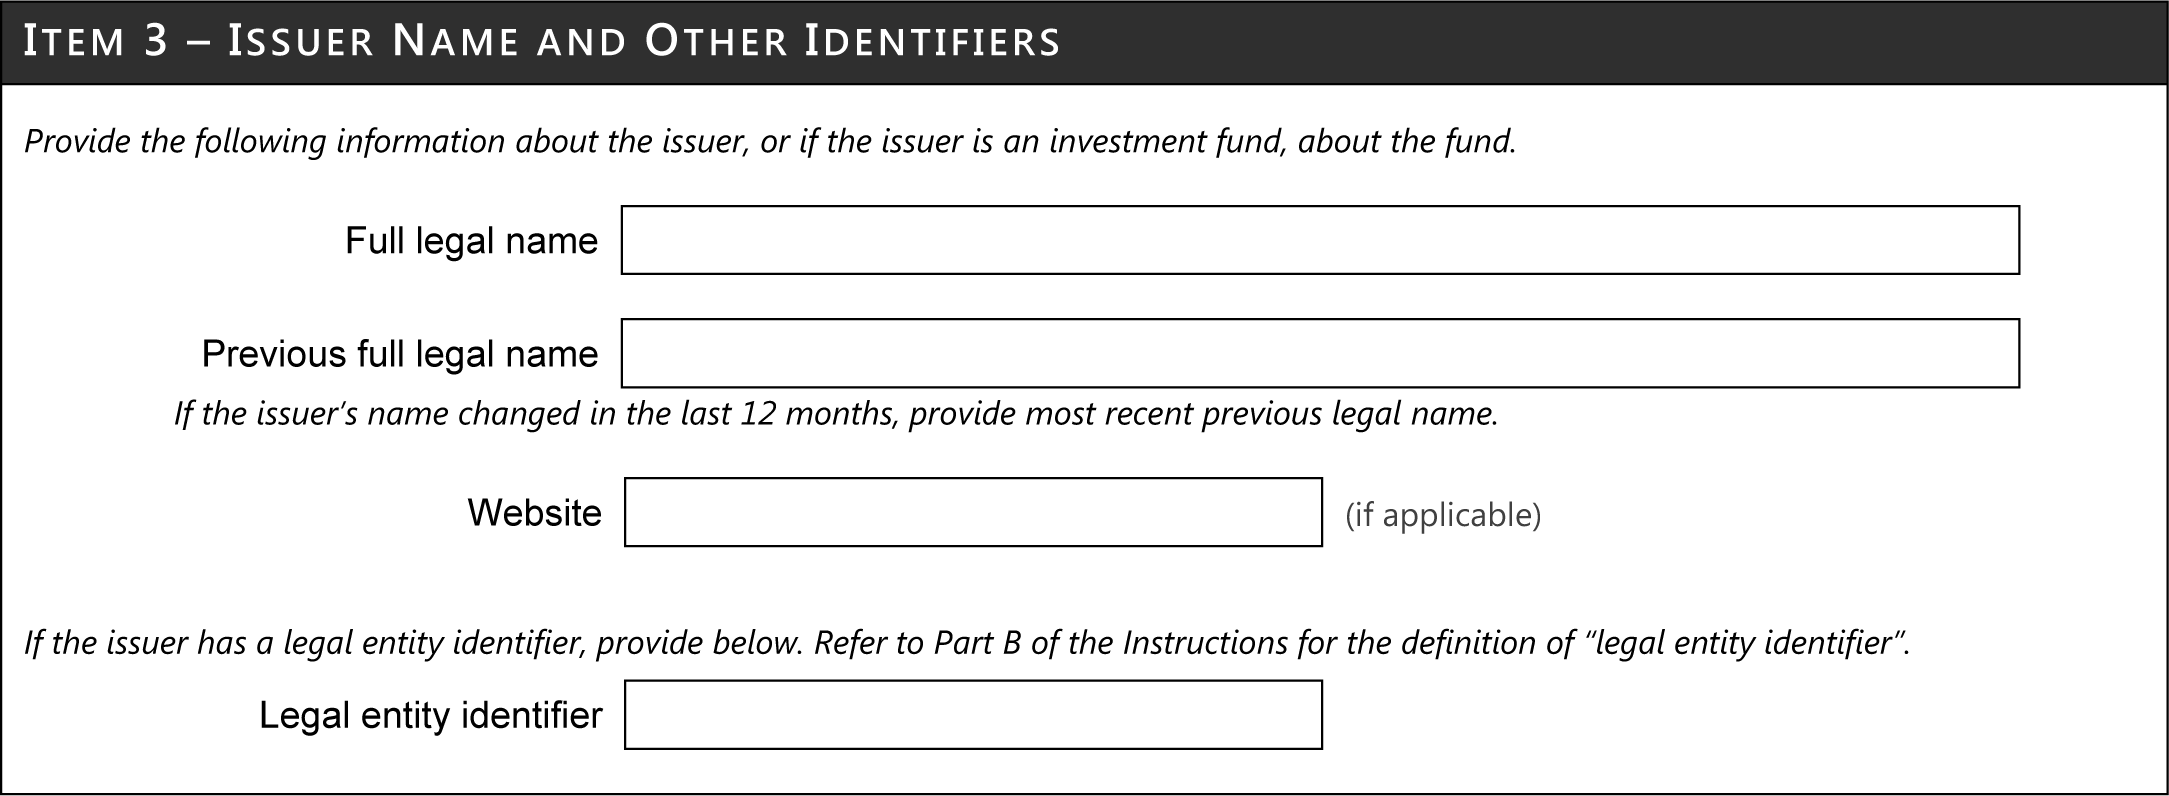 ITEM 3 -- ISSUER NAME AND OTHER IDENTIFIERS